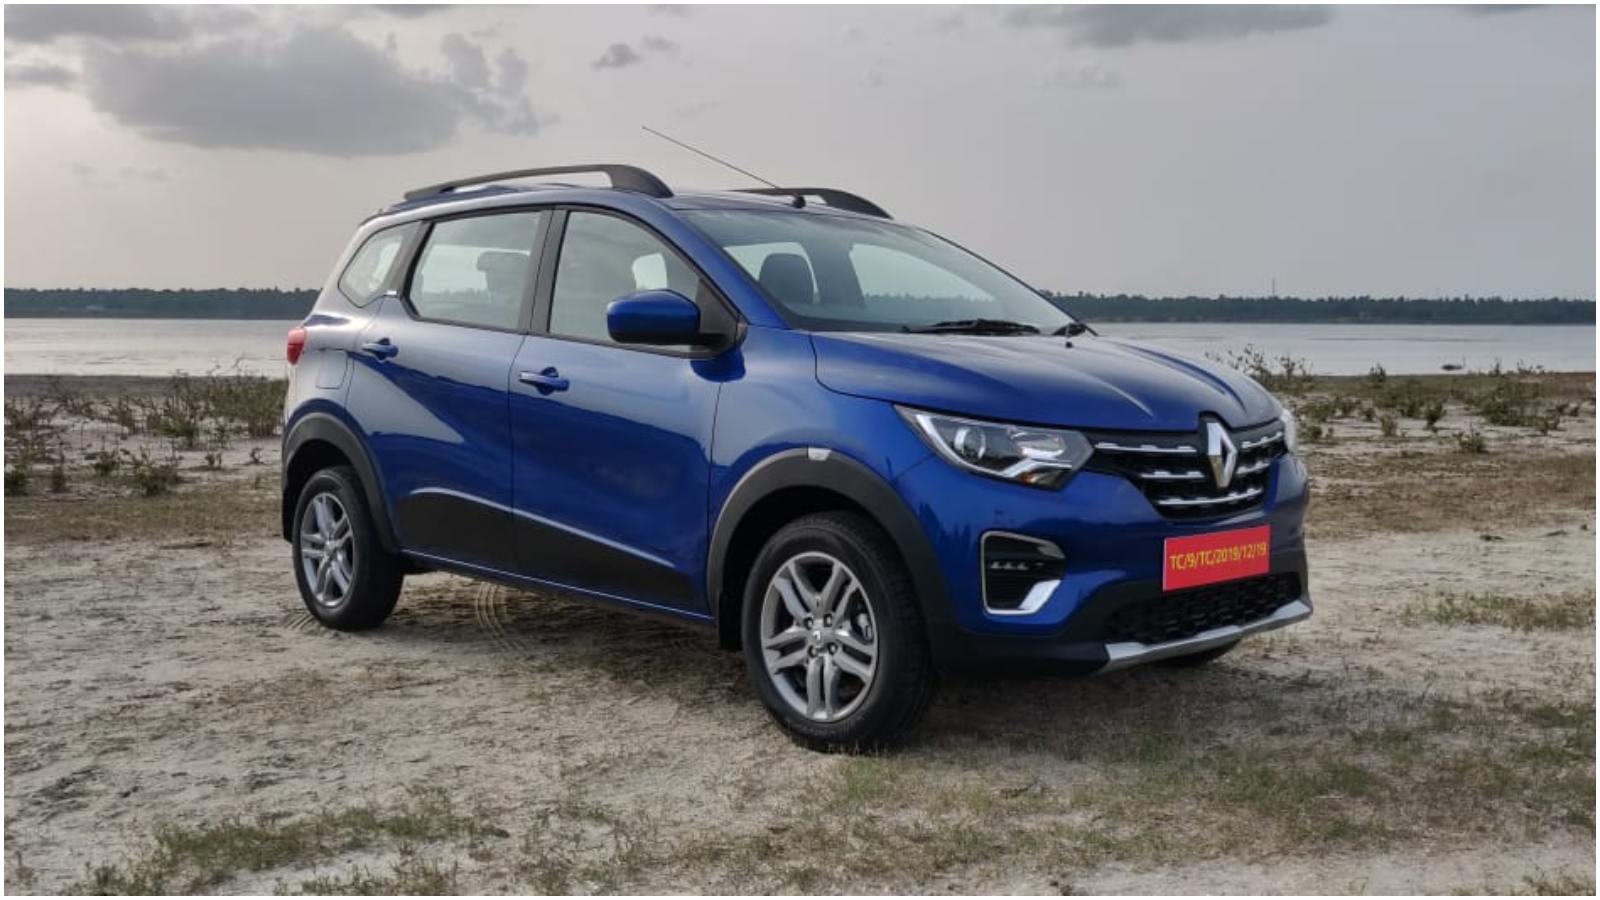 2019 Renault Triber interior and exterior image gallery | Autocar India